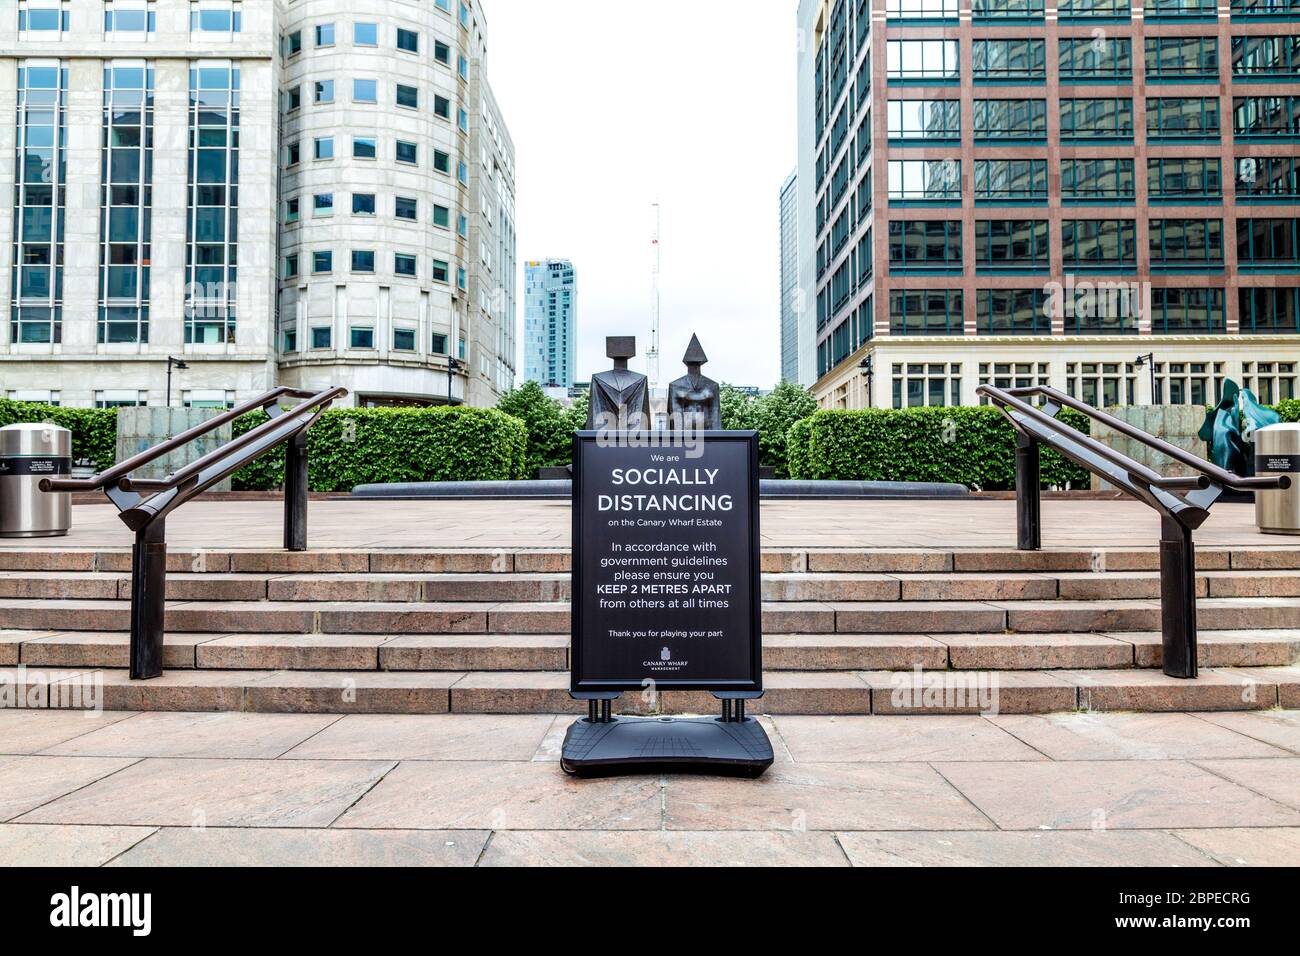 10 May 2020, London, UK - Sign in Canary Wharf asking people to follow government guidelines and keep 2 meters apart during Coronavirus pandemic Stock Photo